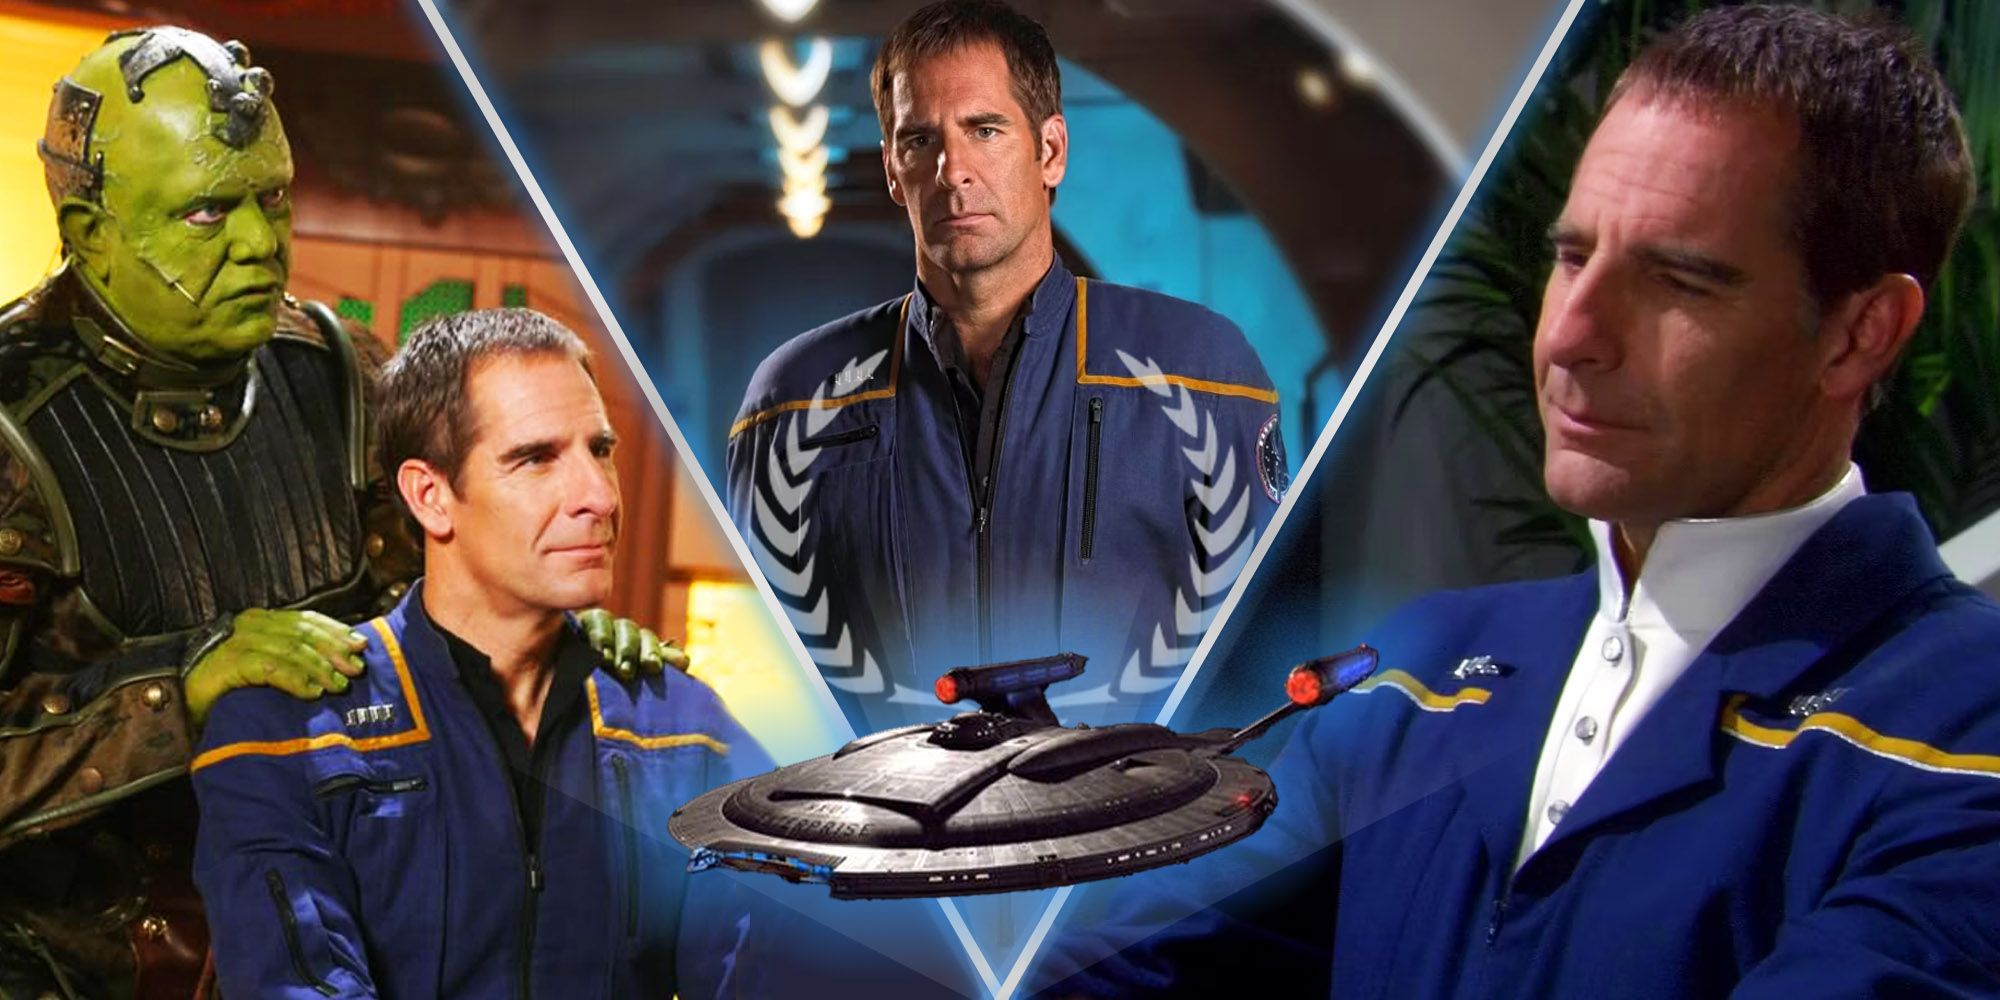 Captain Jonathan Archer montage including stills from Star Trek Enterprise and the NX-01